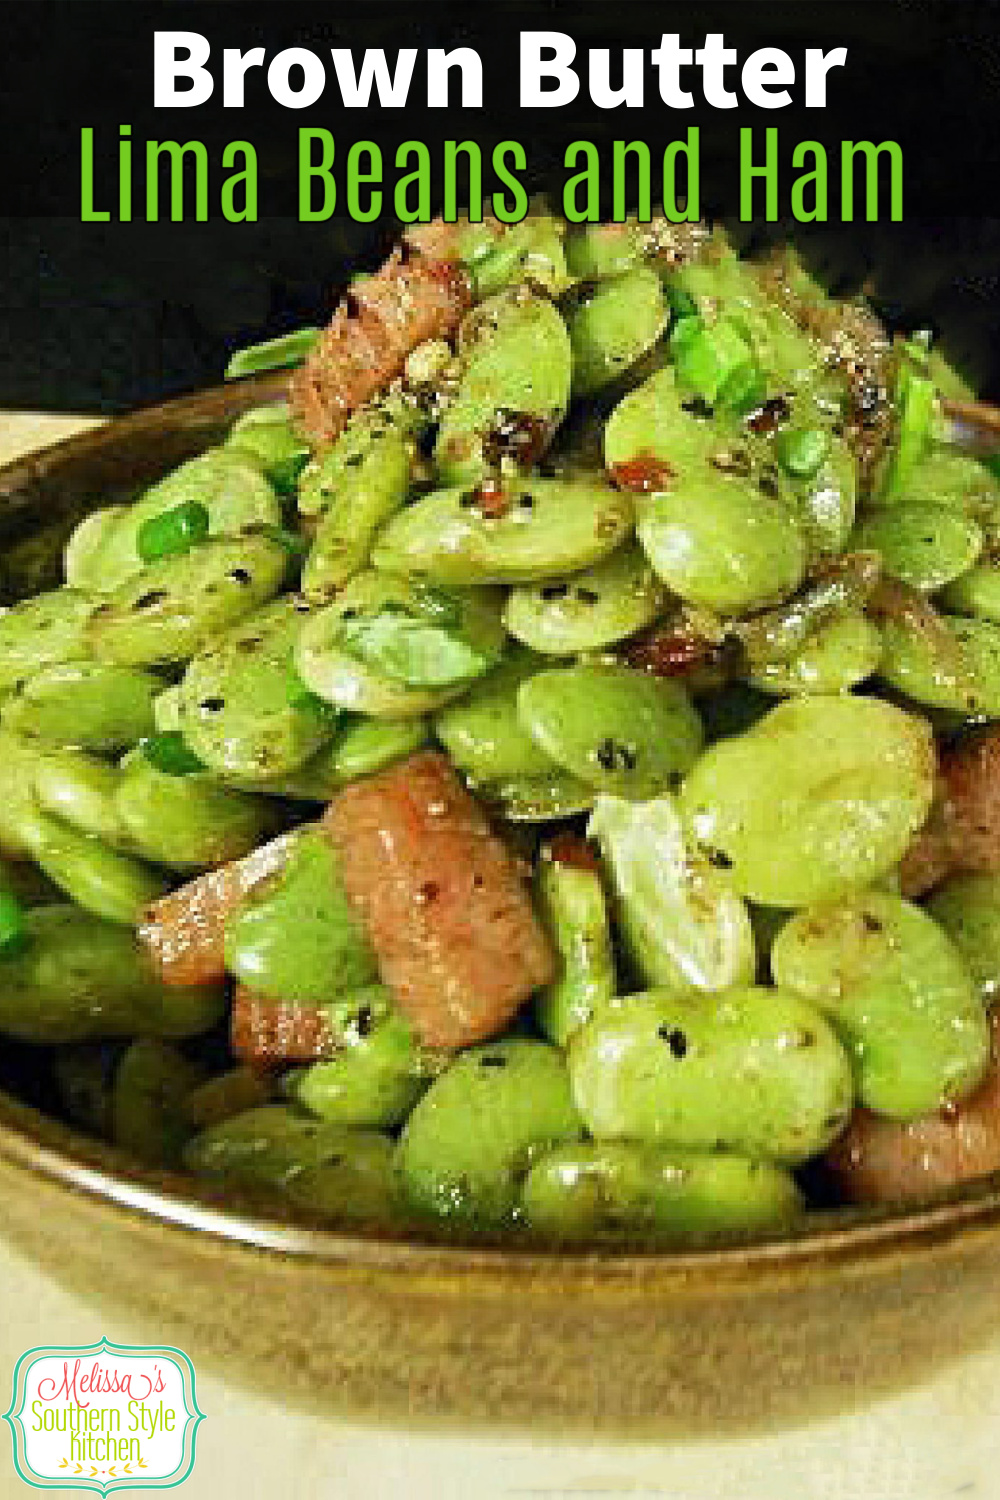 These Brown Butter Lima Beans with Ham are an upgrade on a country classic #limabeans #limabeansandham #leftoverhamrecipes #beans #limabeansrecipes #southernrecipes #easyrecipes #sidedishrecipes via @melissasssk